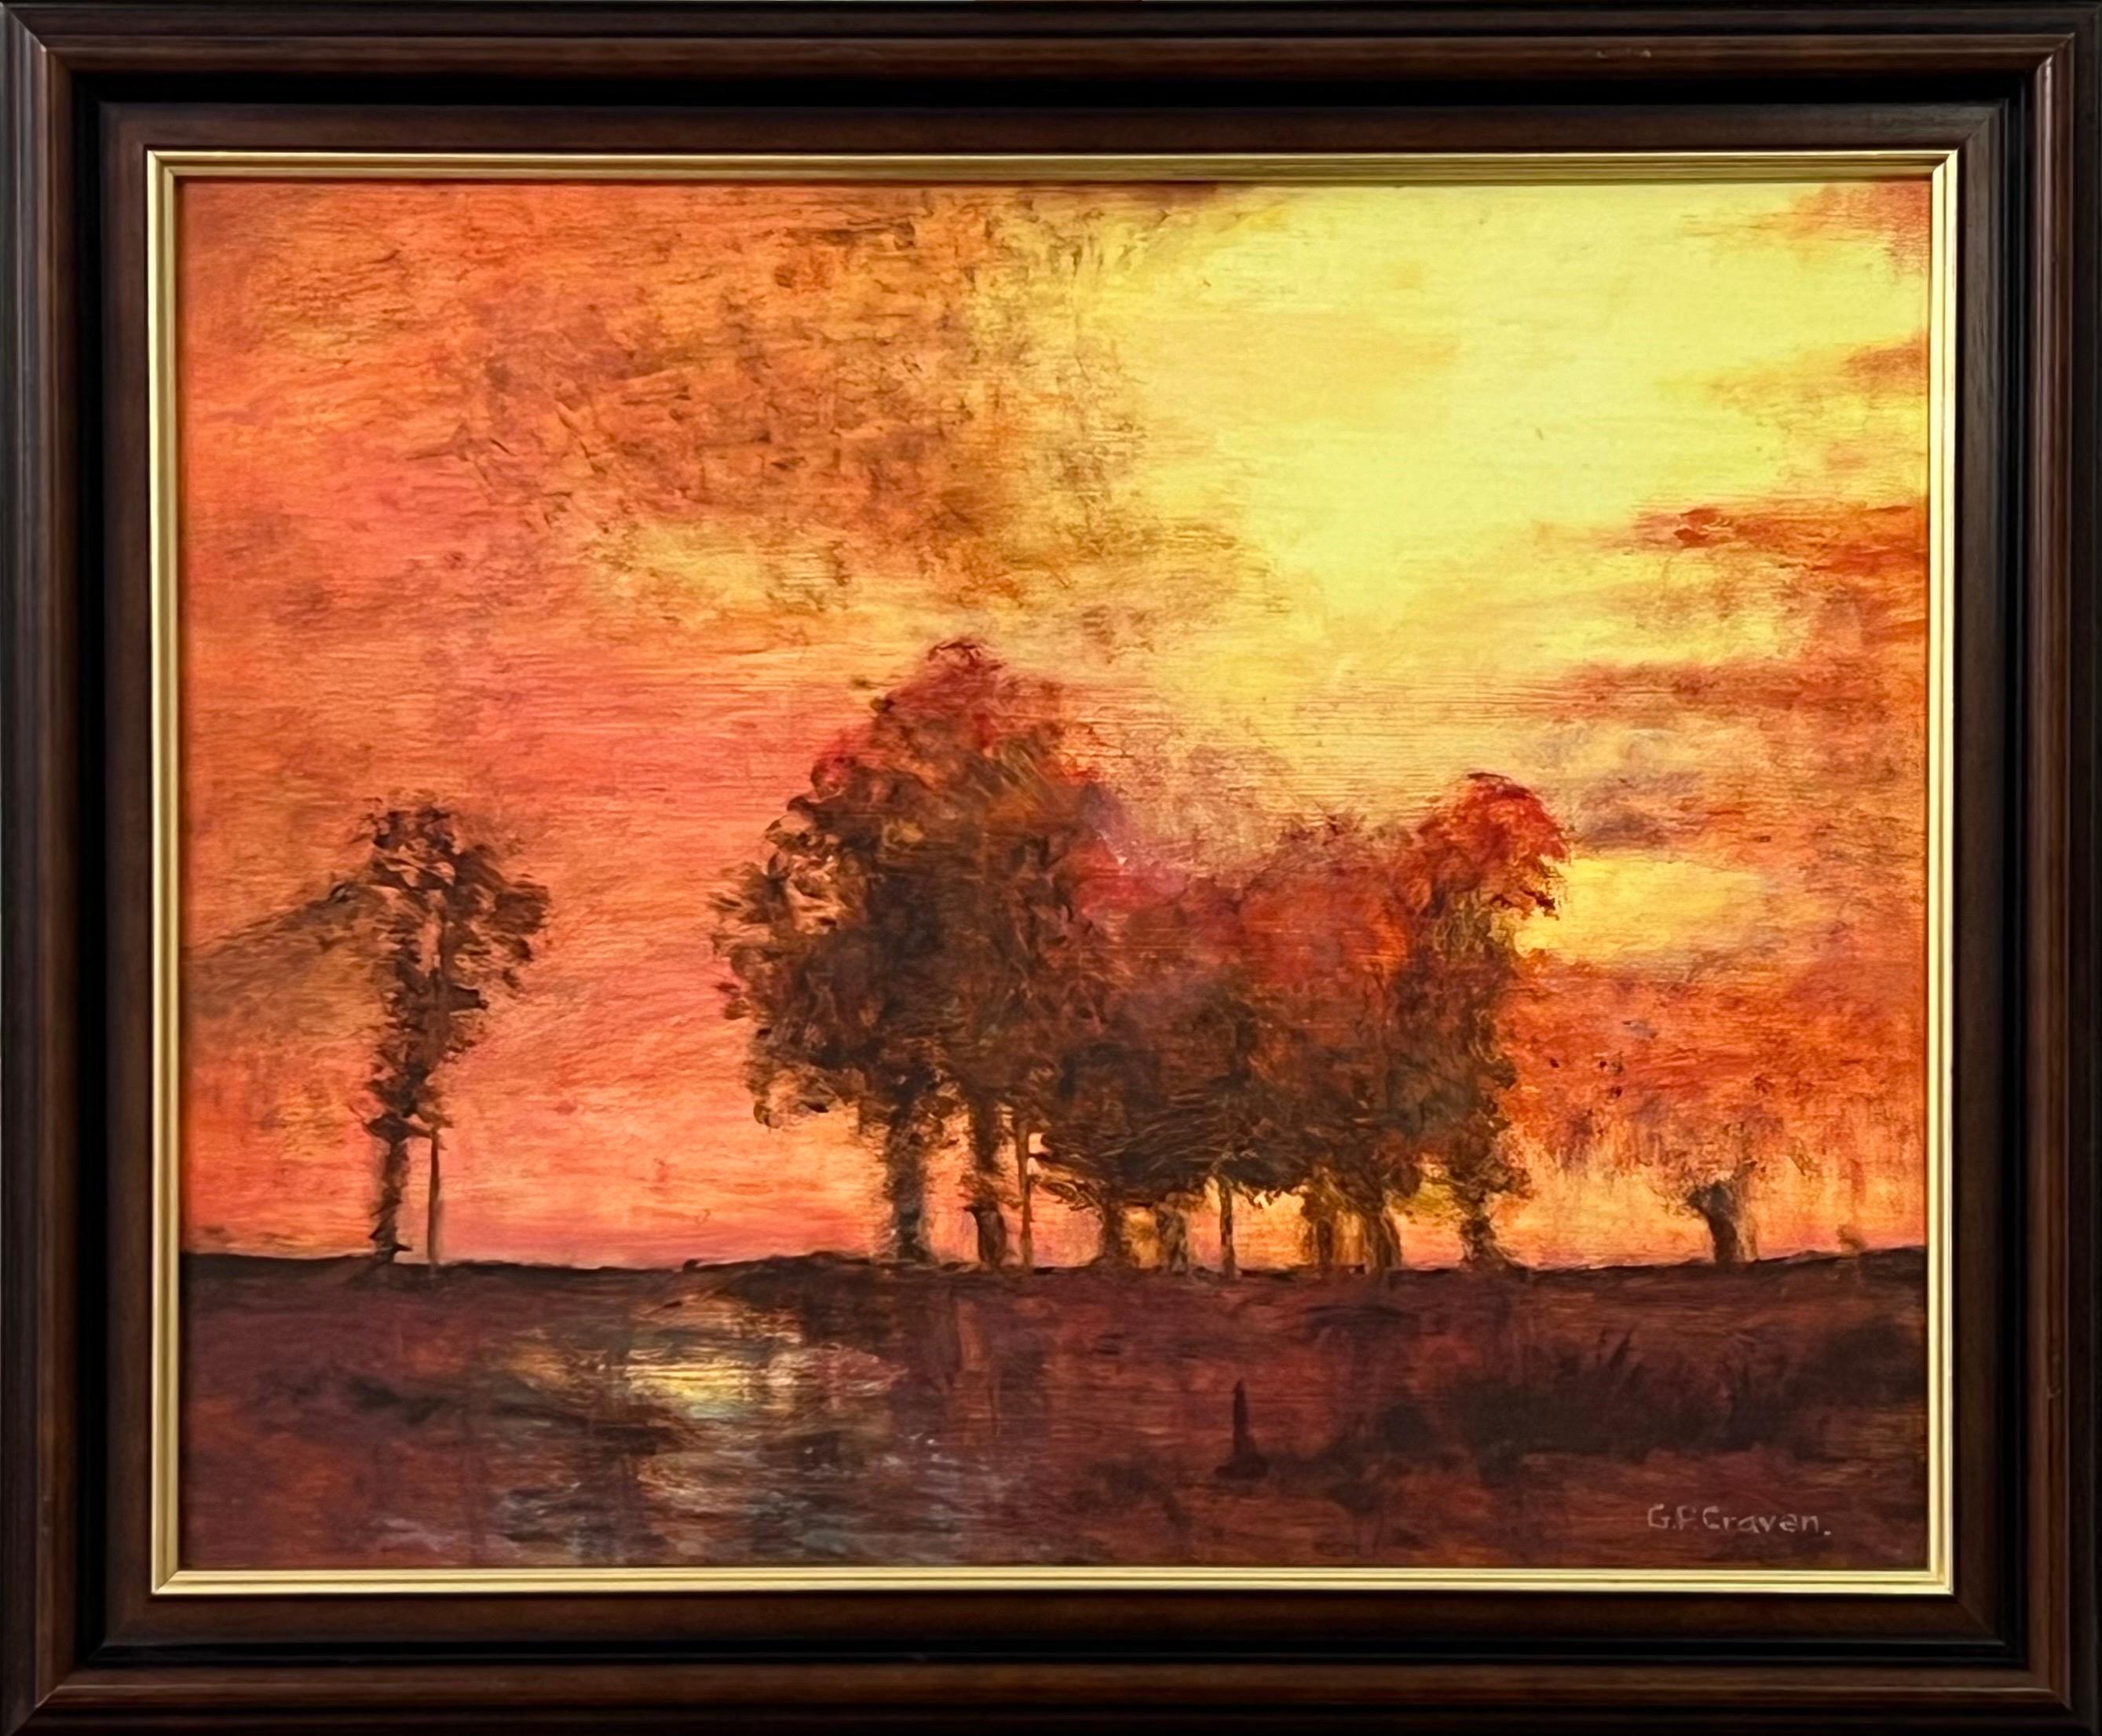 Tree Landscape Sunset with Oranges & Yellows by British Artist